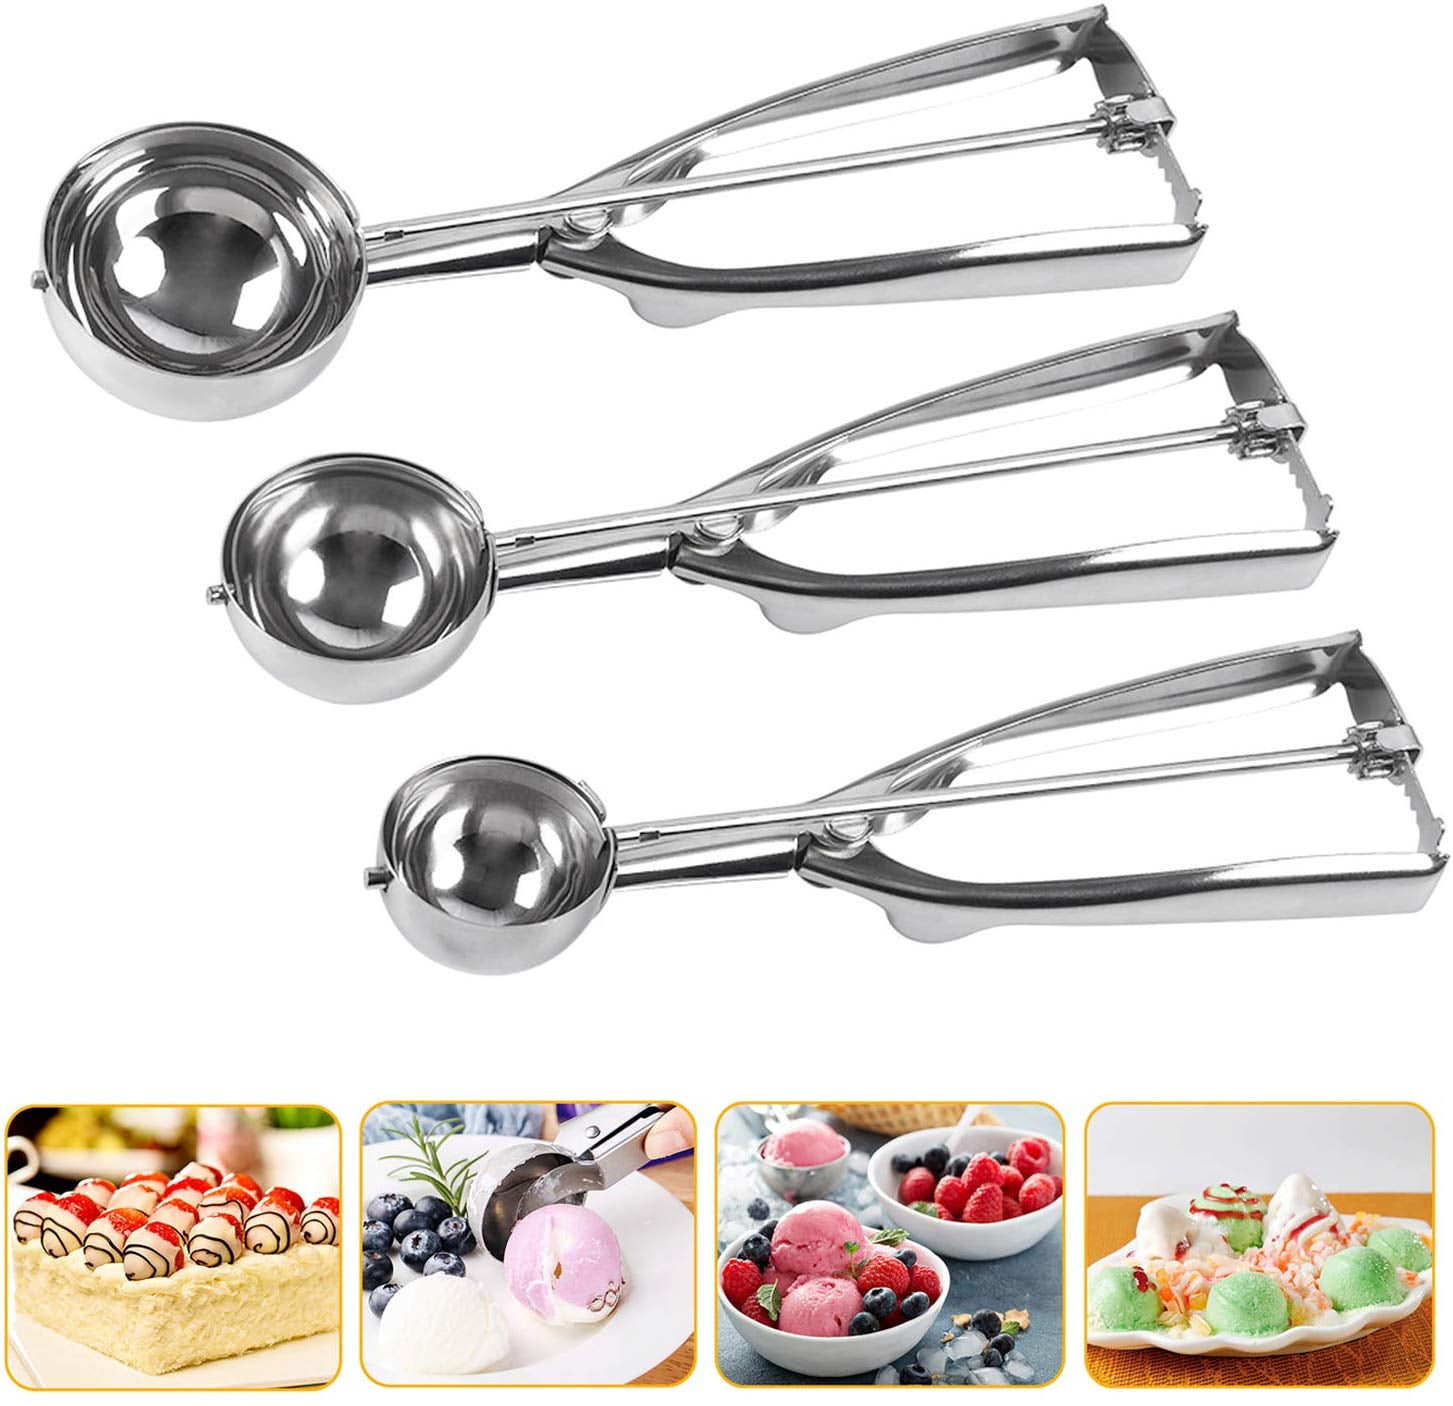 Stainless Steel Ice Cream Scoop Chef Soup spoon Cookie Scoop Cupcake Scoop with Trigger 18/8Medical Stainless Steel Used to Baking Cookie Making a Mold Model 